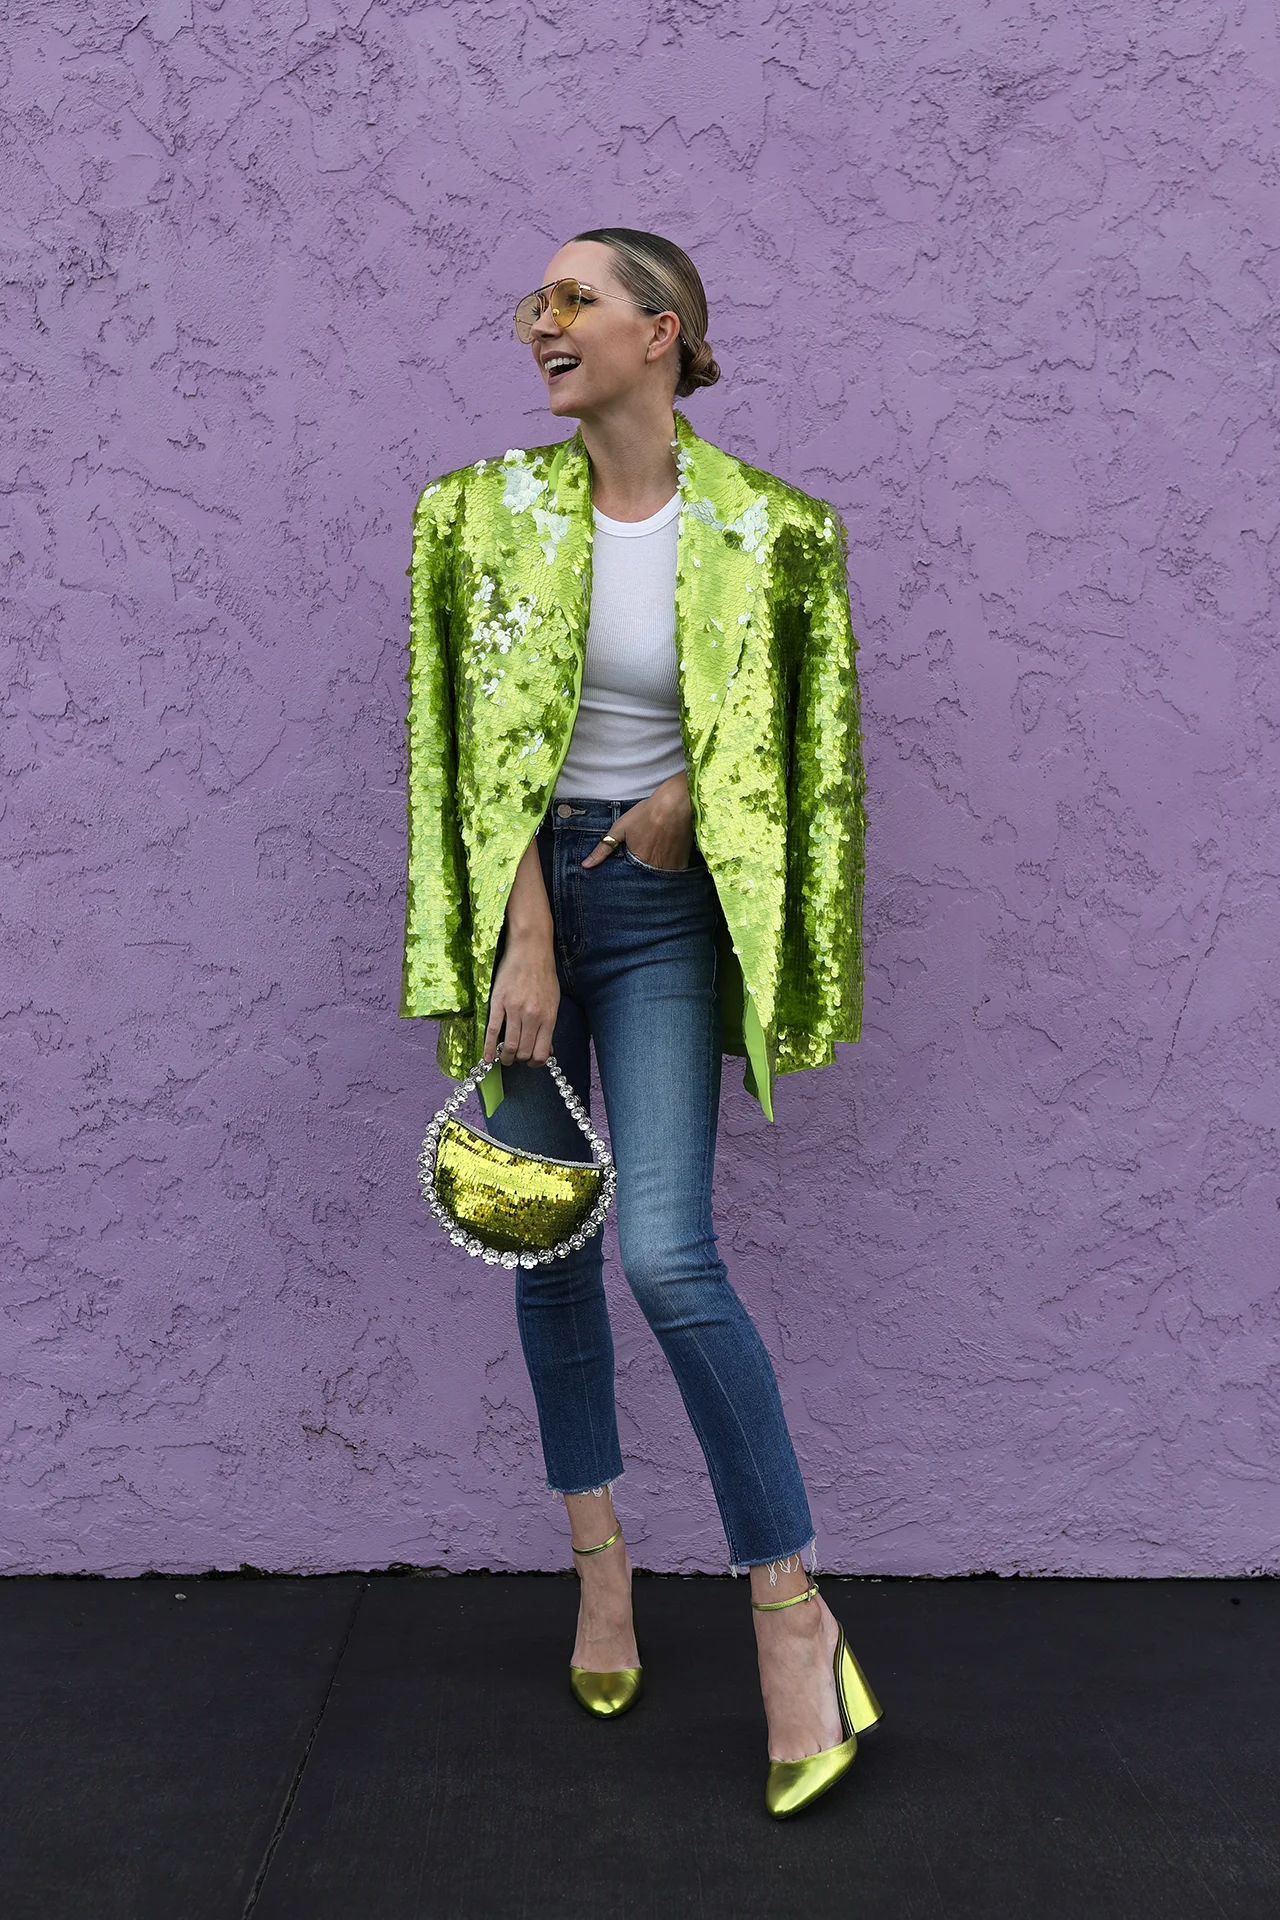 A Look At The Sequin Jacket